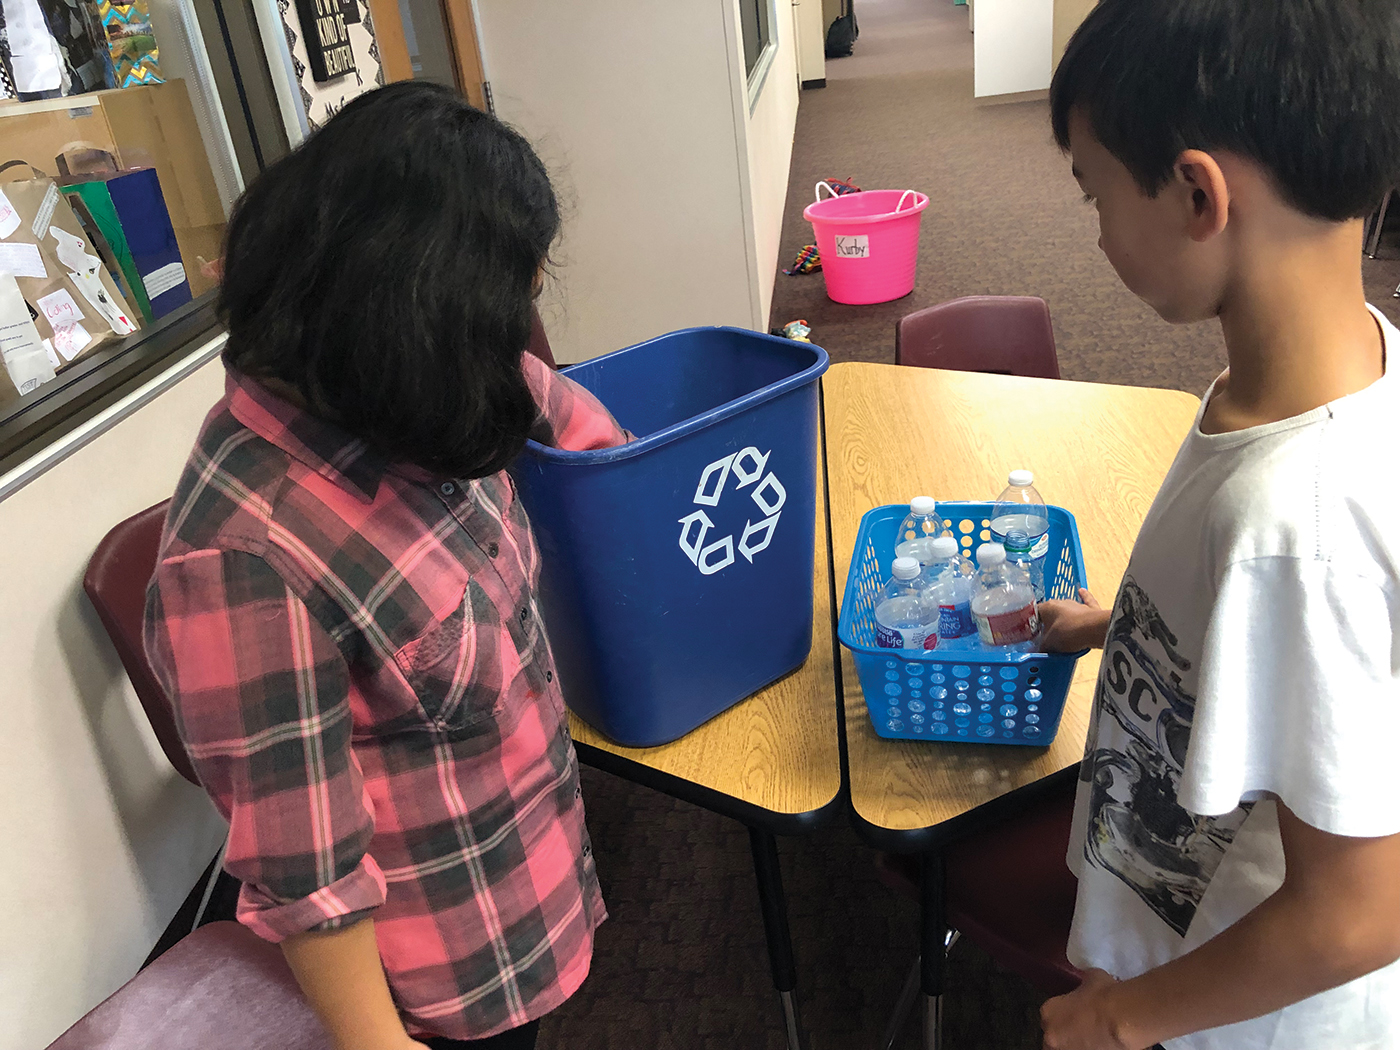 Students count the number of plastic bottles that have been discarded in classroom recycling bins during one school day.